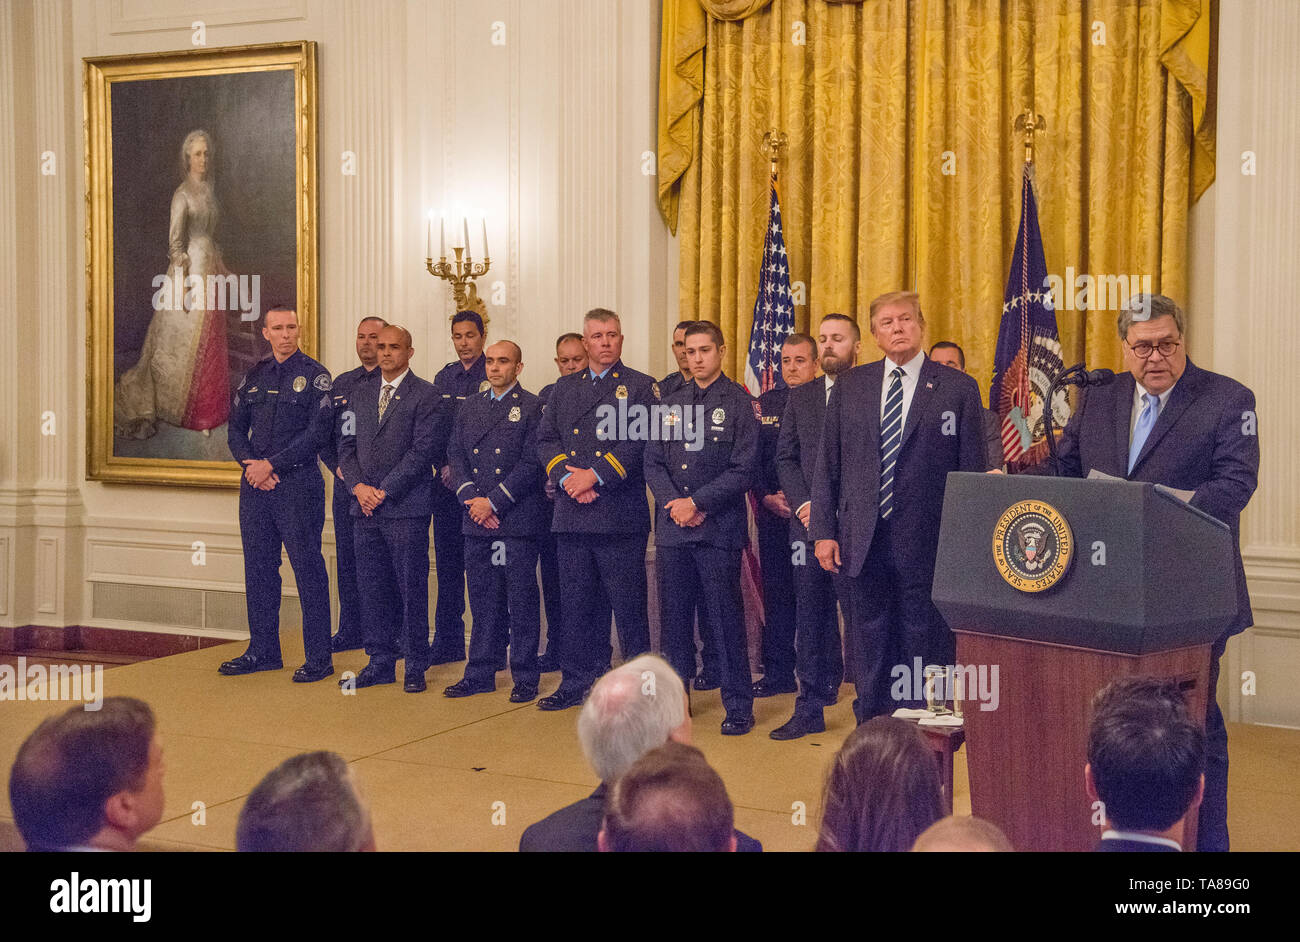 Washington DC , May 22, 2019, USA:  Atty General Barr and President Donald J Trump awards the Medal of Valor to 13 firefighters and police officers  a Stock Photo